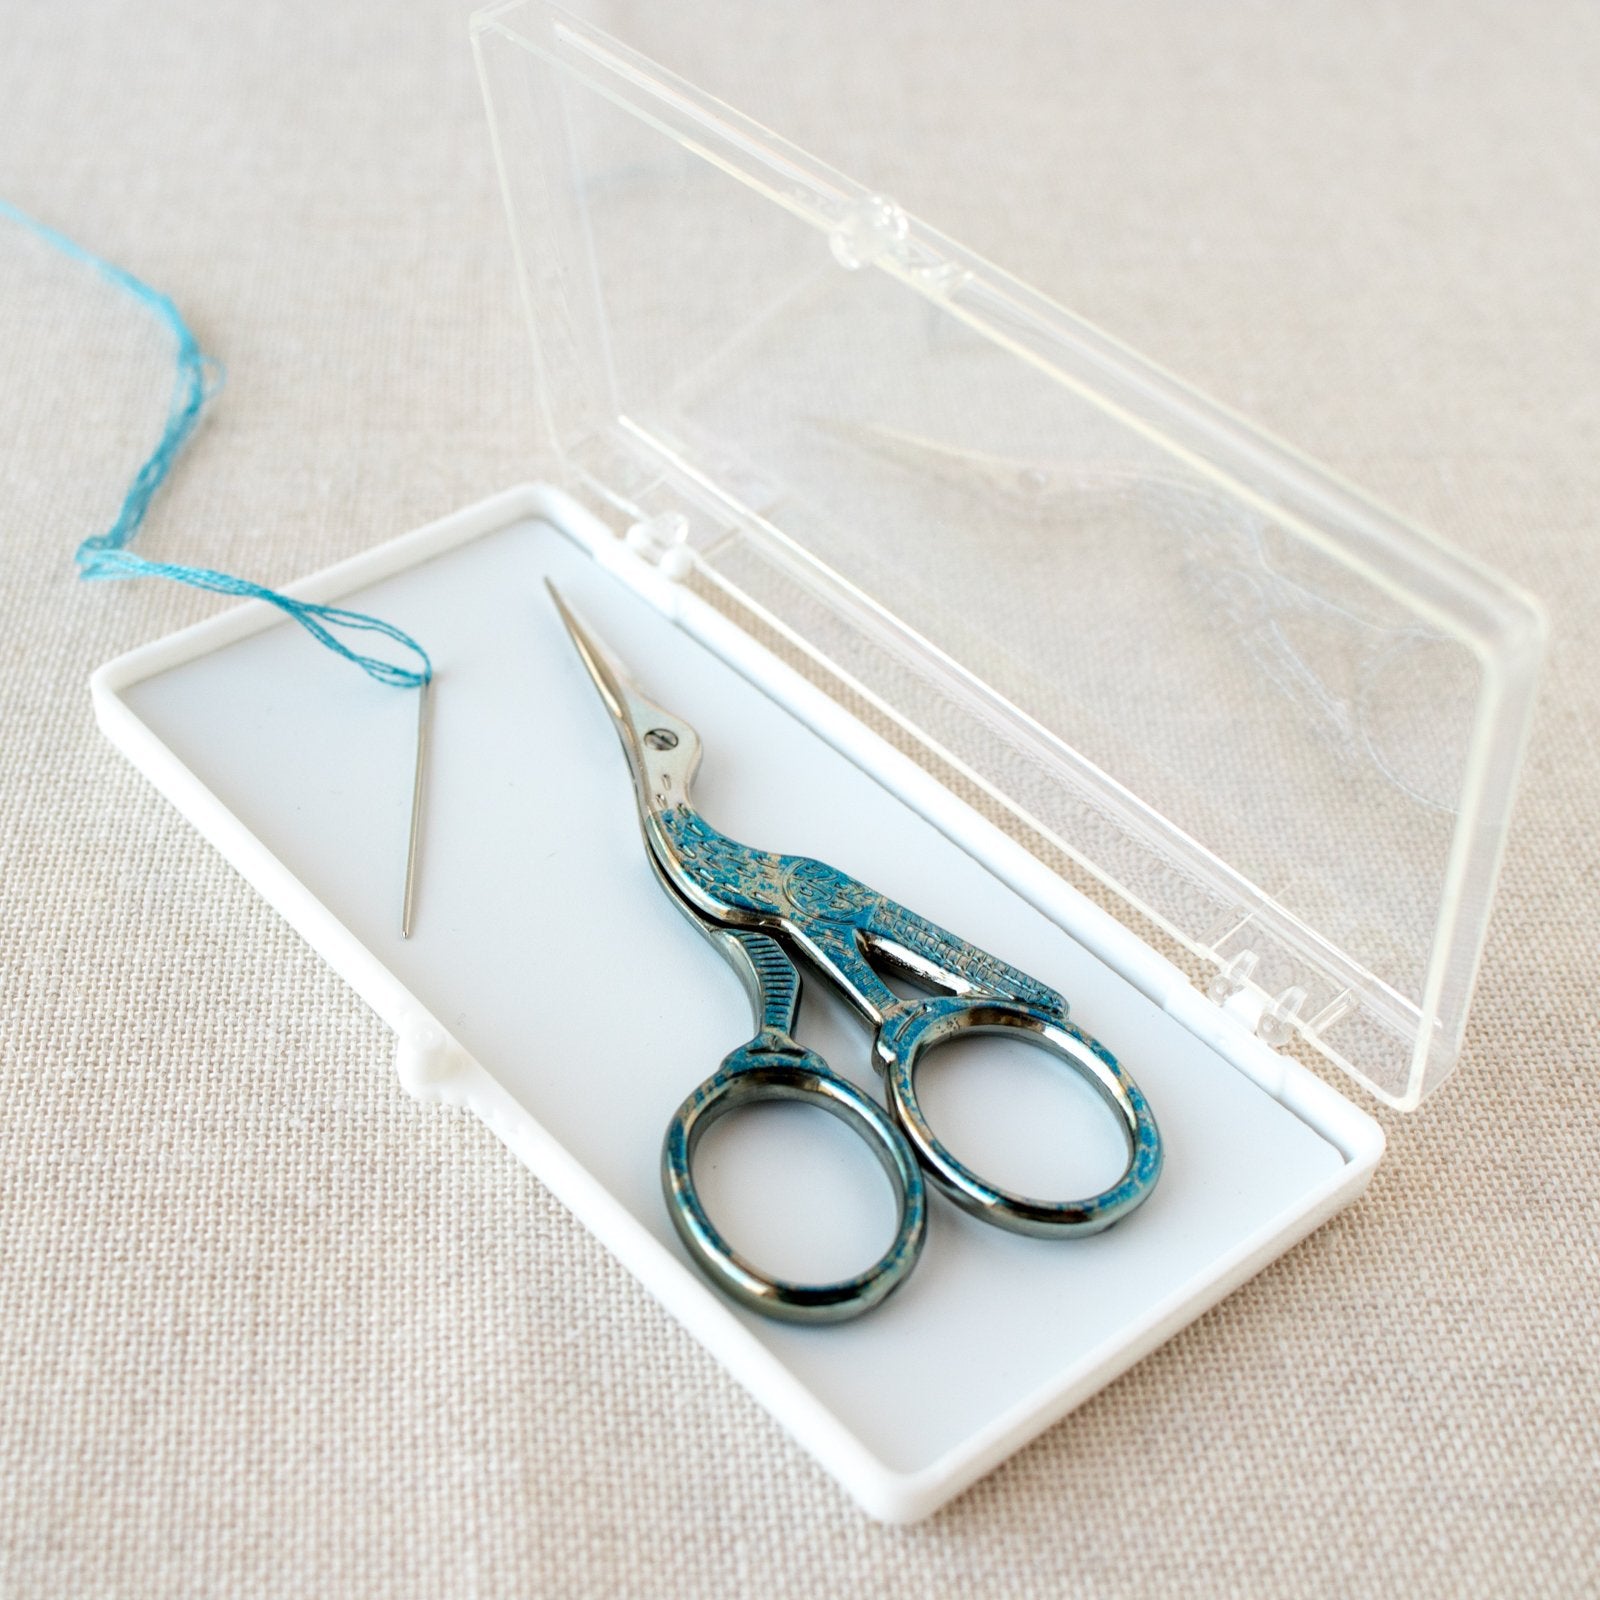 Promotional Utility Scissors with Magnetic Sheath